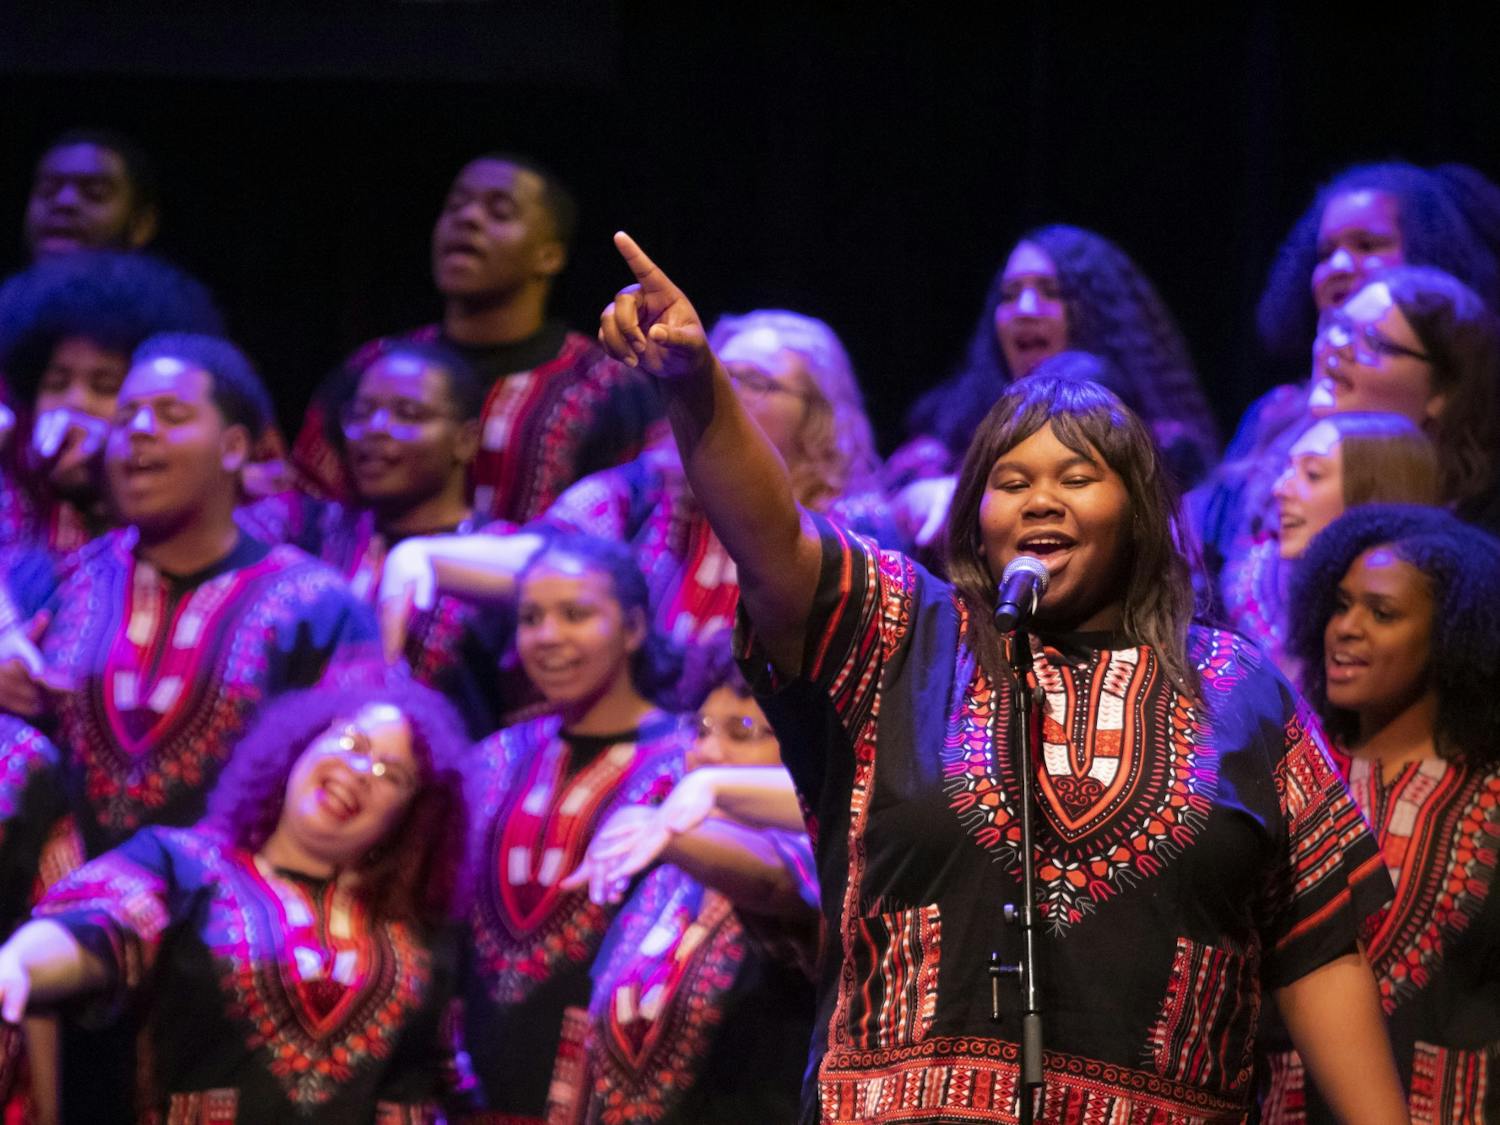 GALLERY: 2020 Martin Luther King Jr. Birthday Celebration at the Buskirk-Chumley Theater